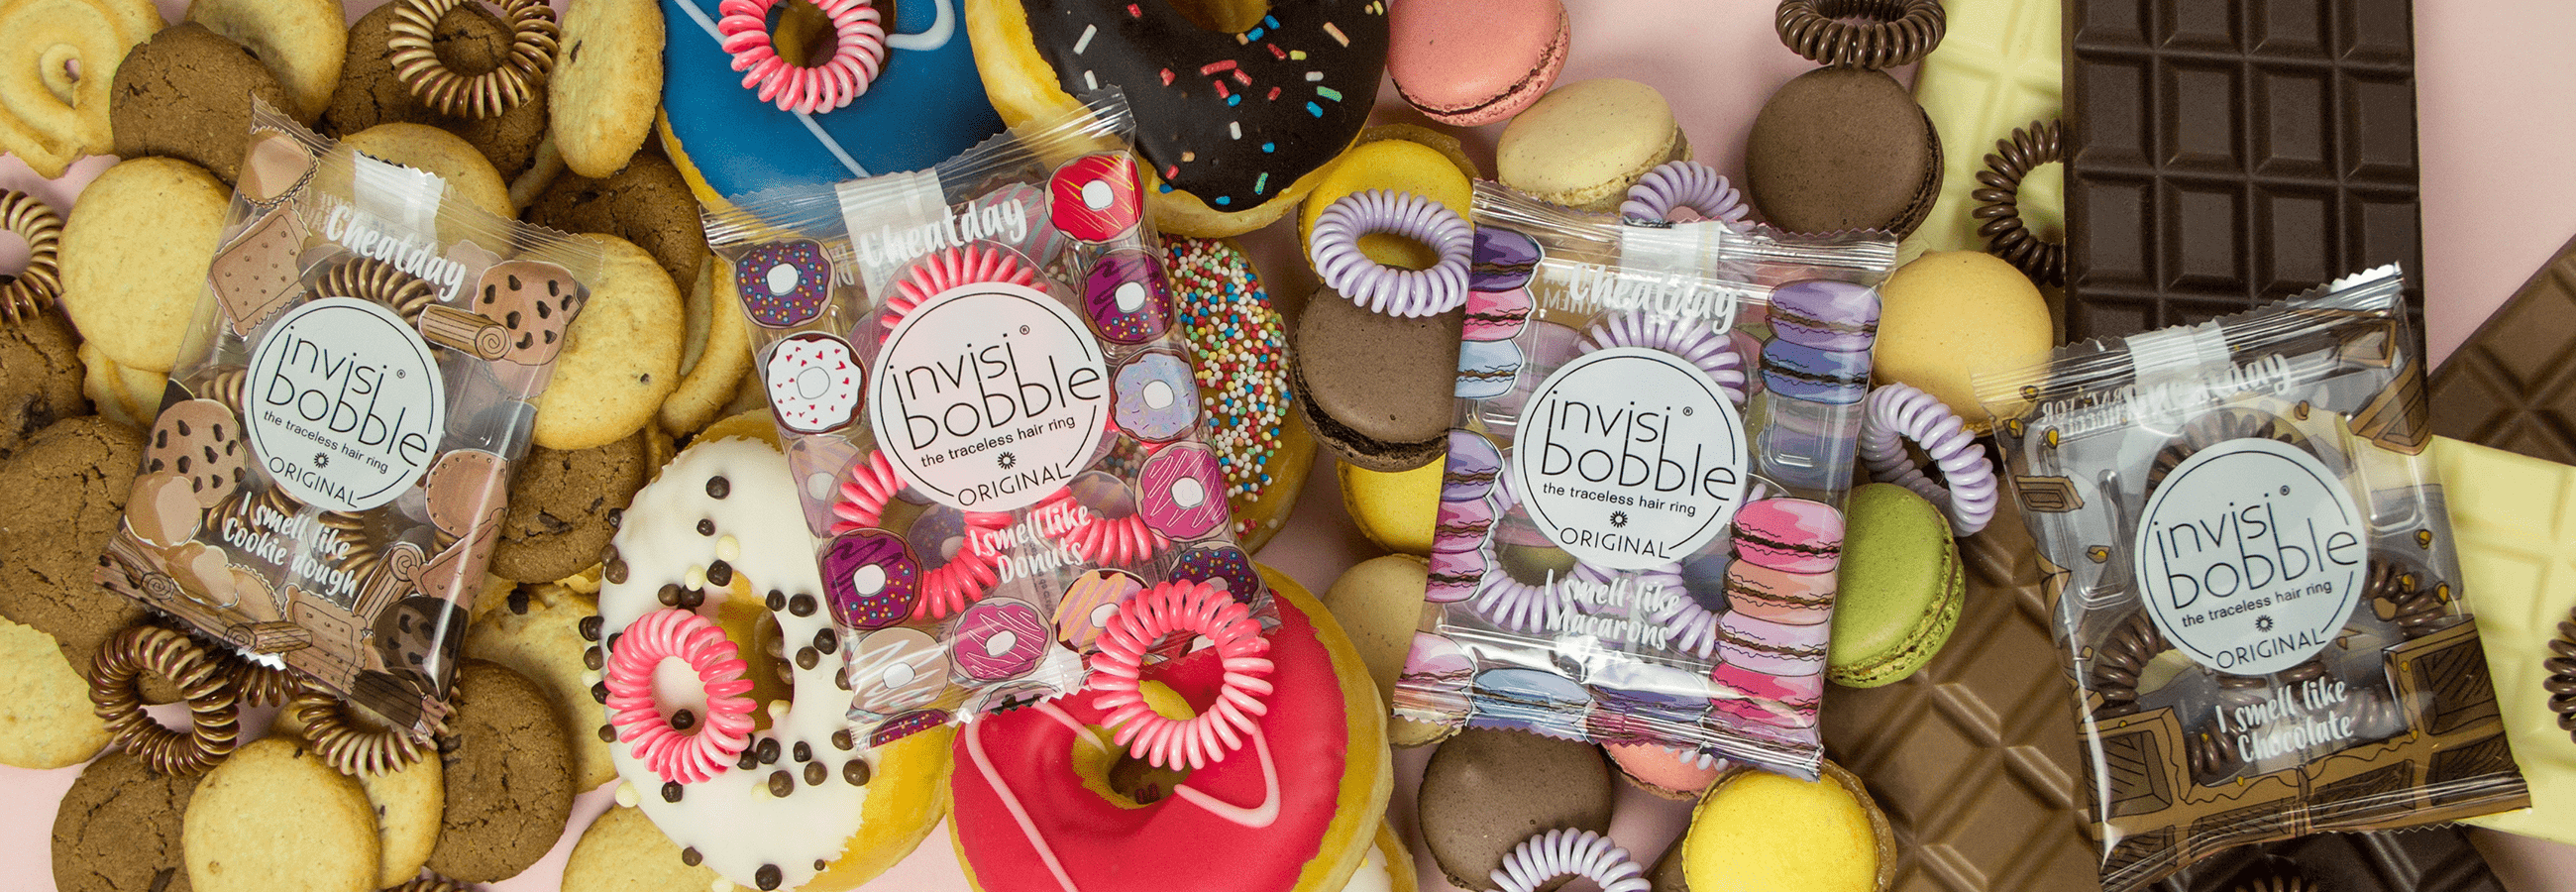 invisibobble traceless hair ring, invisibobble,Cheatday Limited Collection,Donut Cream, invisibobble 1 szt, invisibobble 1 sztuka, invisibobble 1001 cosmetice, invisibobble 1ks, invisibobble 2, invisibobble 2015, invisibobble 2016, invisibobble 3, invisibobble 3 hair, invisibobble 3 hair ring, invisibobble 3 hair rings, invisibobble 2017, invisibobble christmas 2015, invisibobble pack 3 coleteros, invisibobble power, invisibobble spring 2016, invisibobble summer 2015, invisibobble ขาย, invisibobble ขายที่ไหน, invisibobble คือ, invisibobble ซื้อ, invisibobble ซื้อที่ไหน, invisibobble ดียังไง, invisibobble ดีไหม, invisibobble พร้อมส่ง, invisibobble ยางรัดผม, invisibobble ราคา, invisibobble รีวิว, invisibobble รุ่น power, invisibobble สีไหนสวย, ยางรัดผม invisibobble